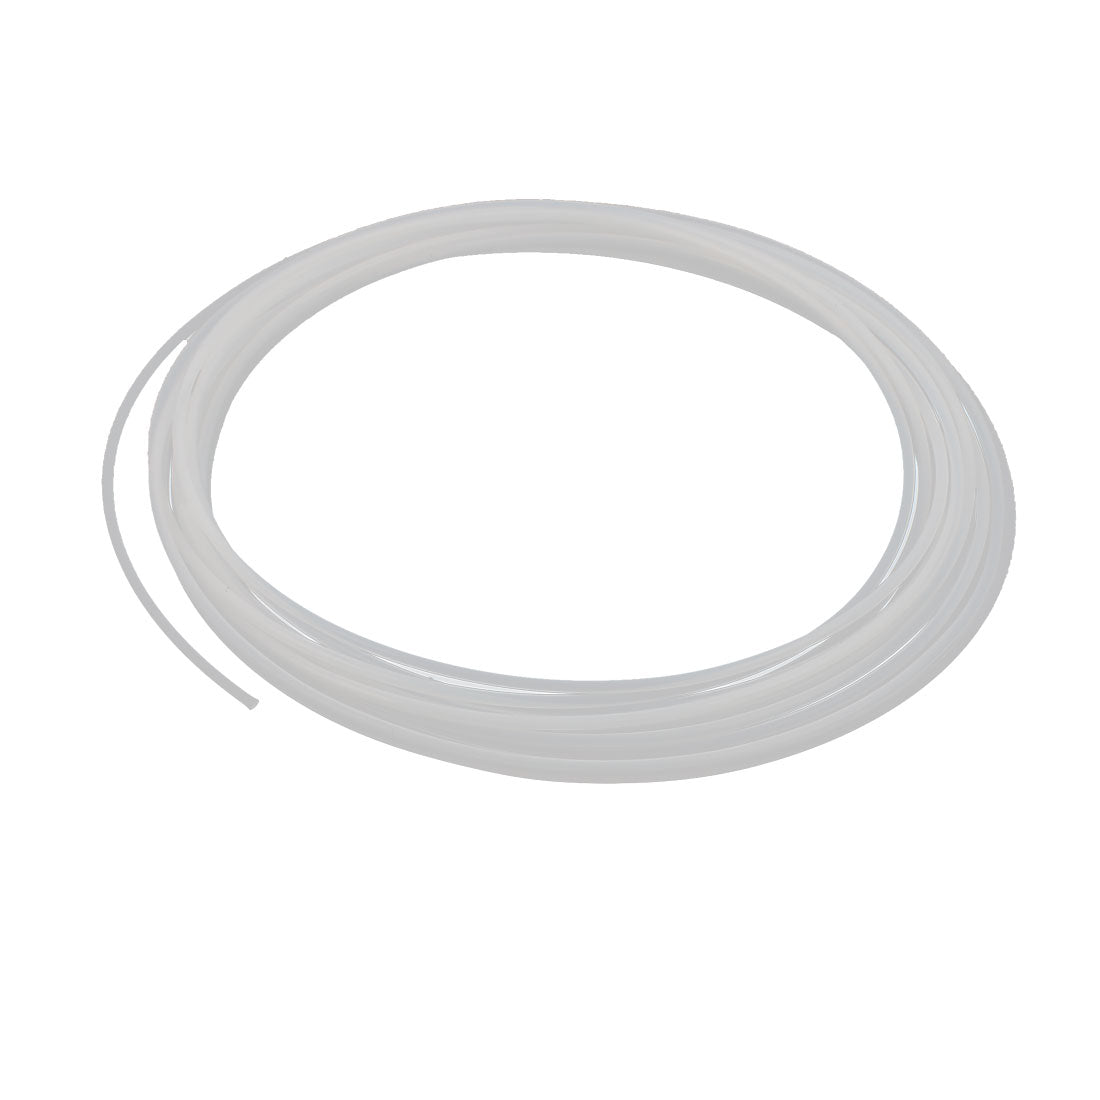 uxcell Uxcell 1mm x 2mm PTFE High Lubricating Ability Tubing 5 Meters 16.4Ft for Electronics